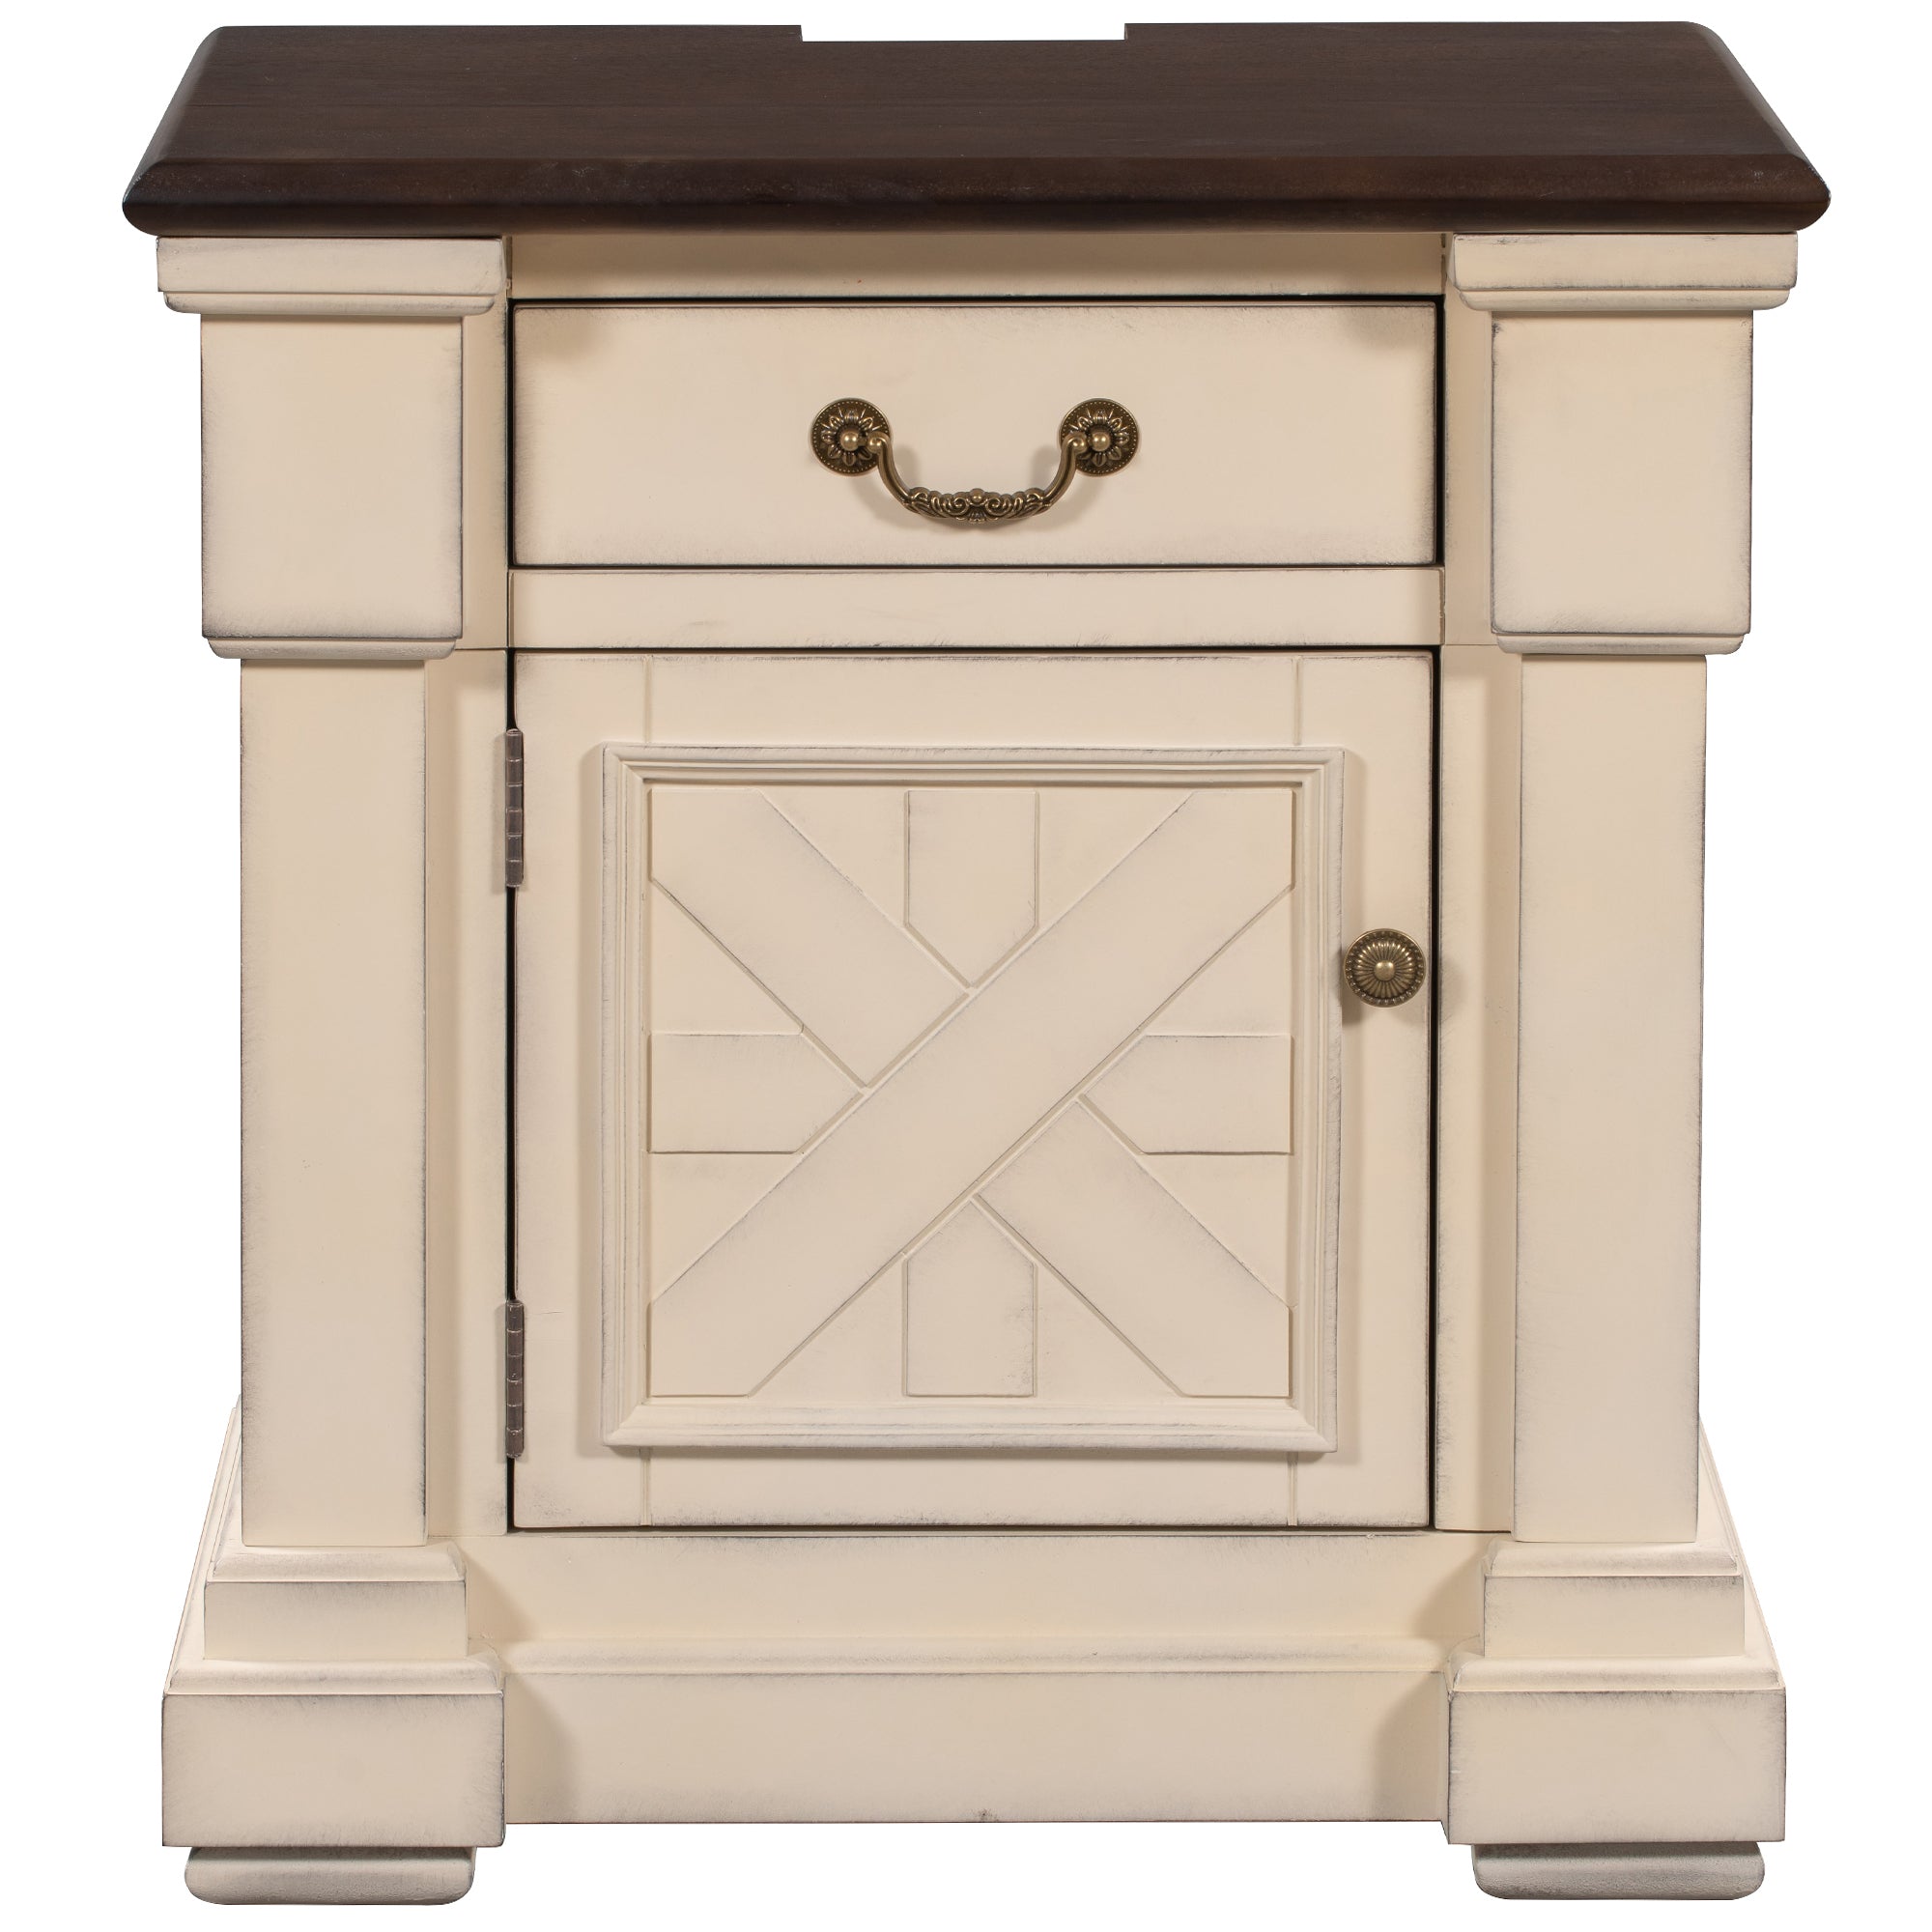 Nightstand with 1 Drawer and Cabinet,USB Charging Ports,Antique White